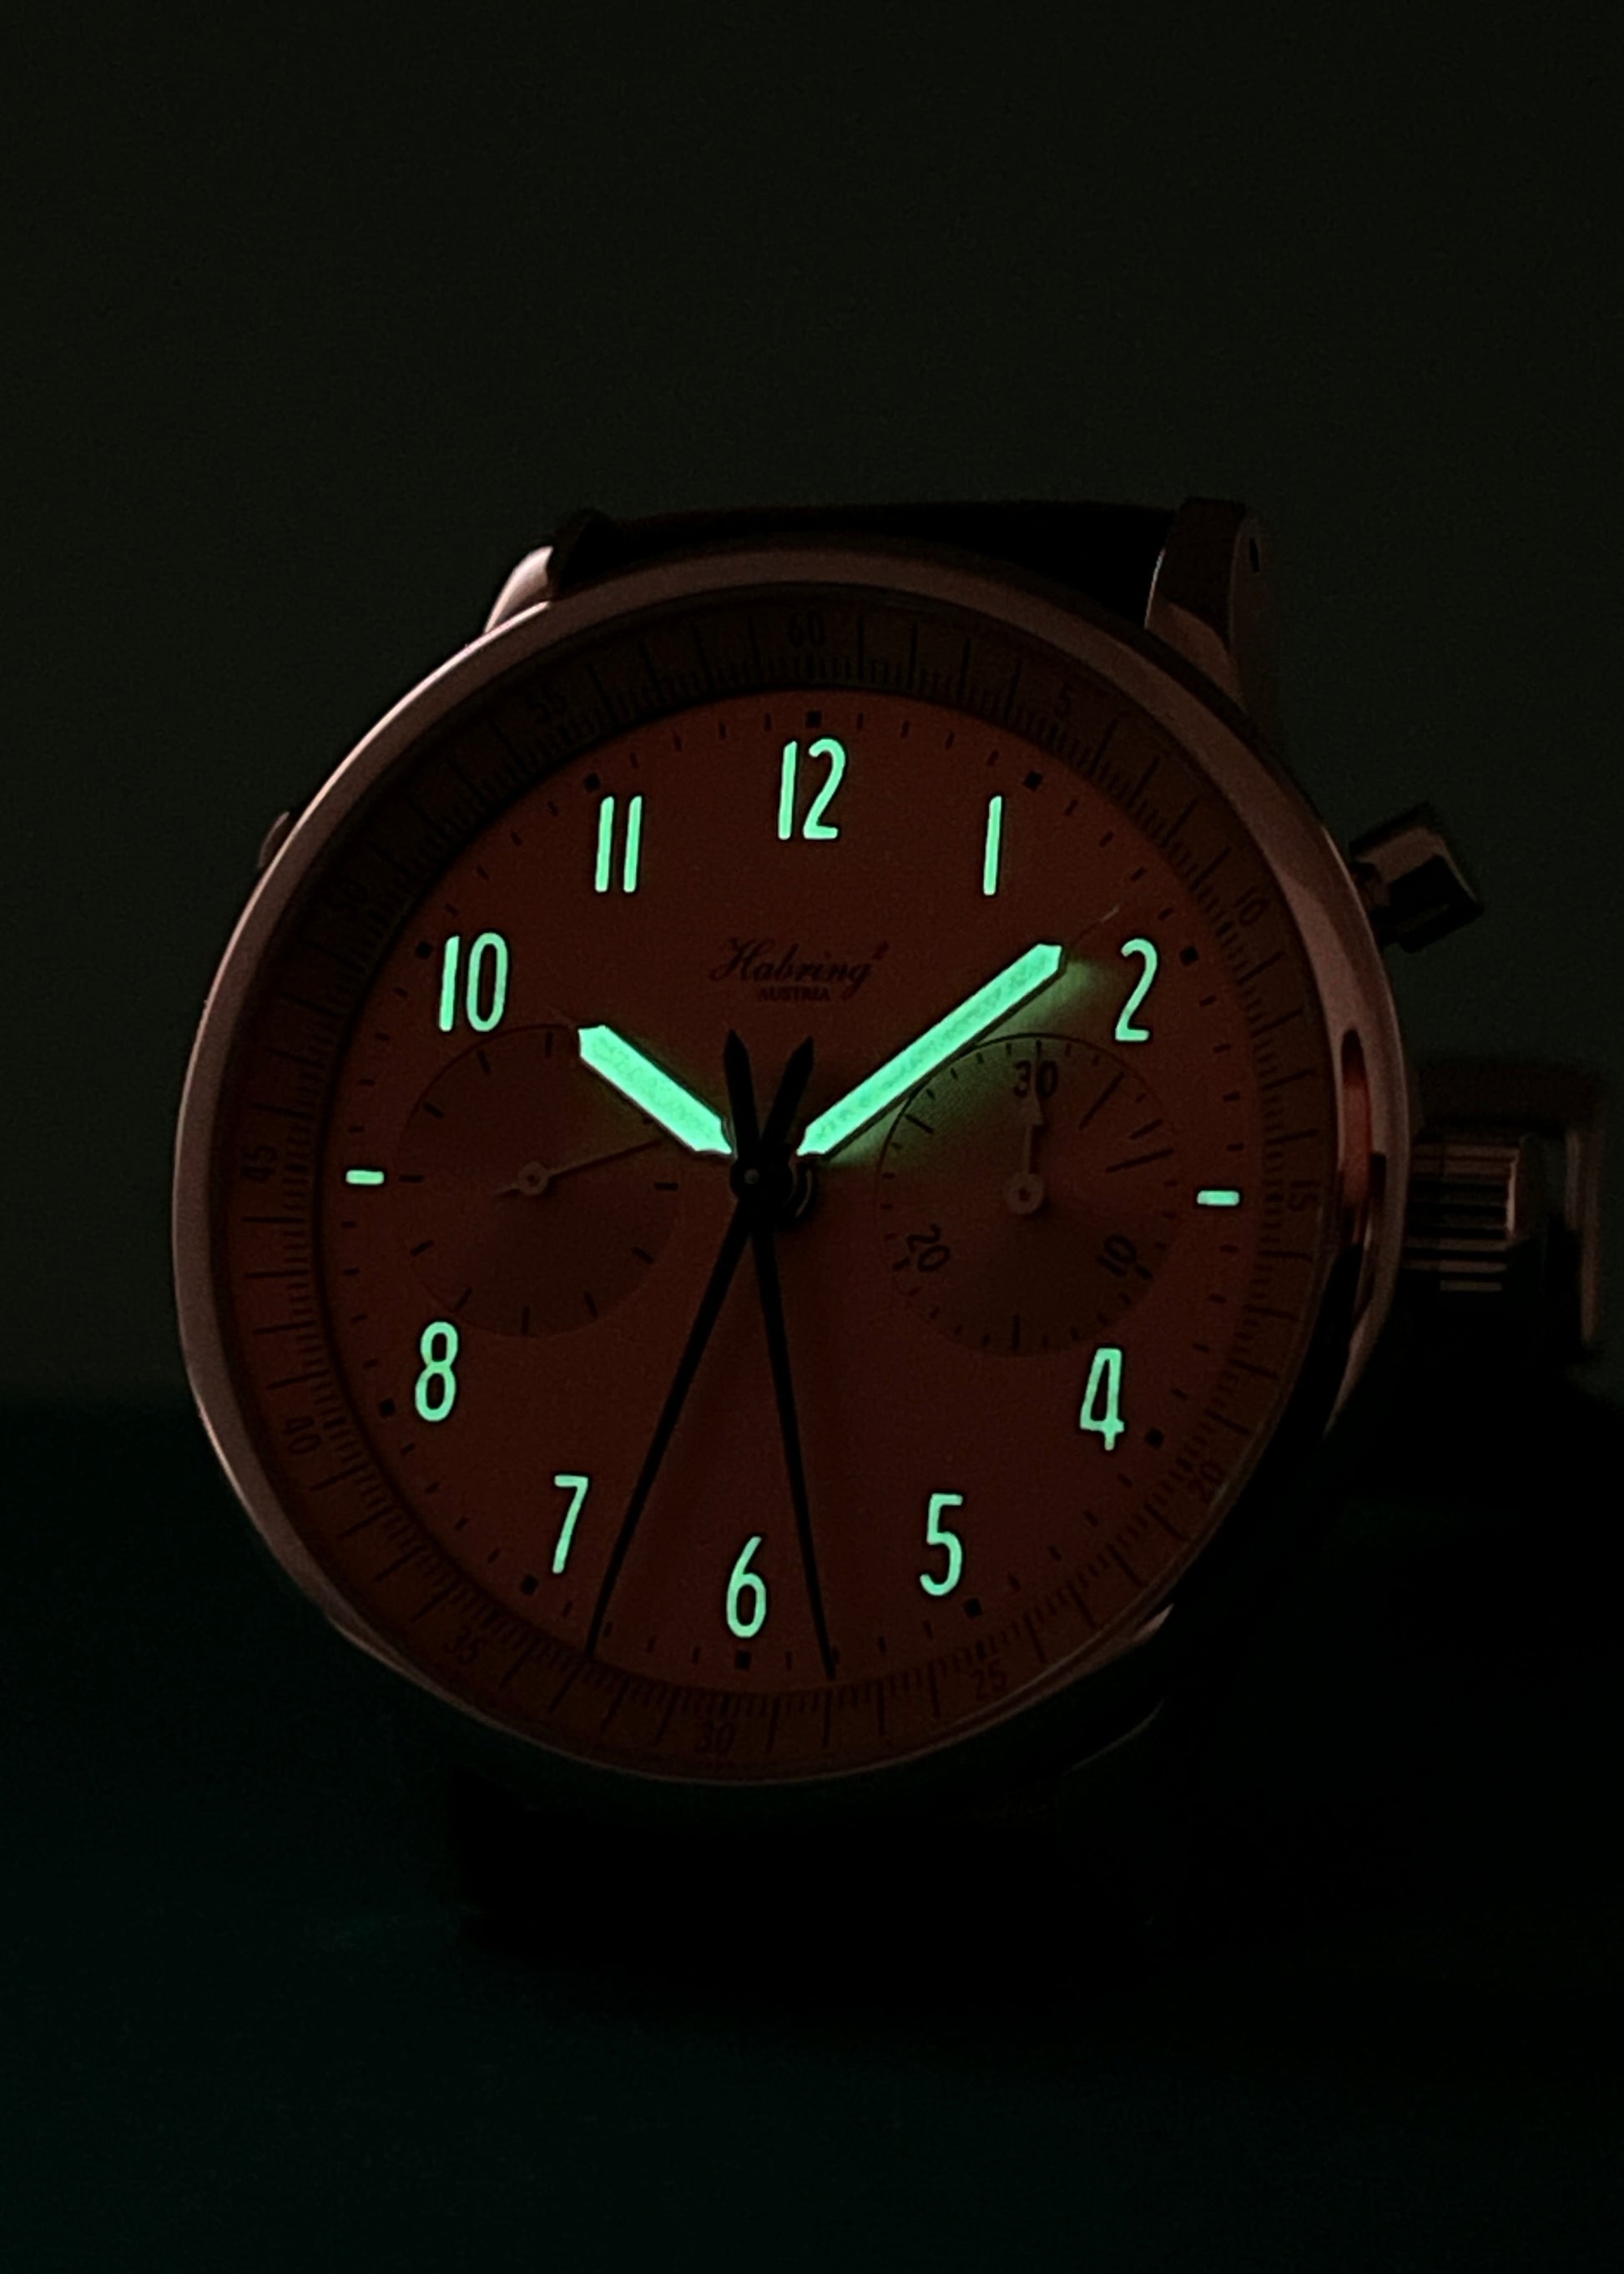 Lume Shot of Habring2 Doppel 38 with Salmon Dial